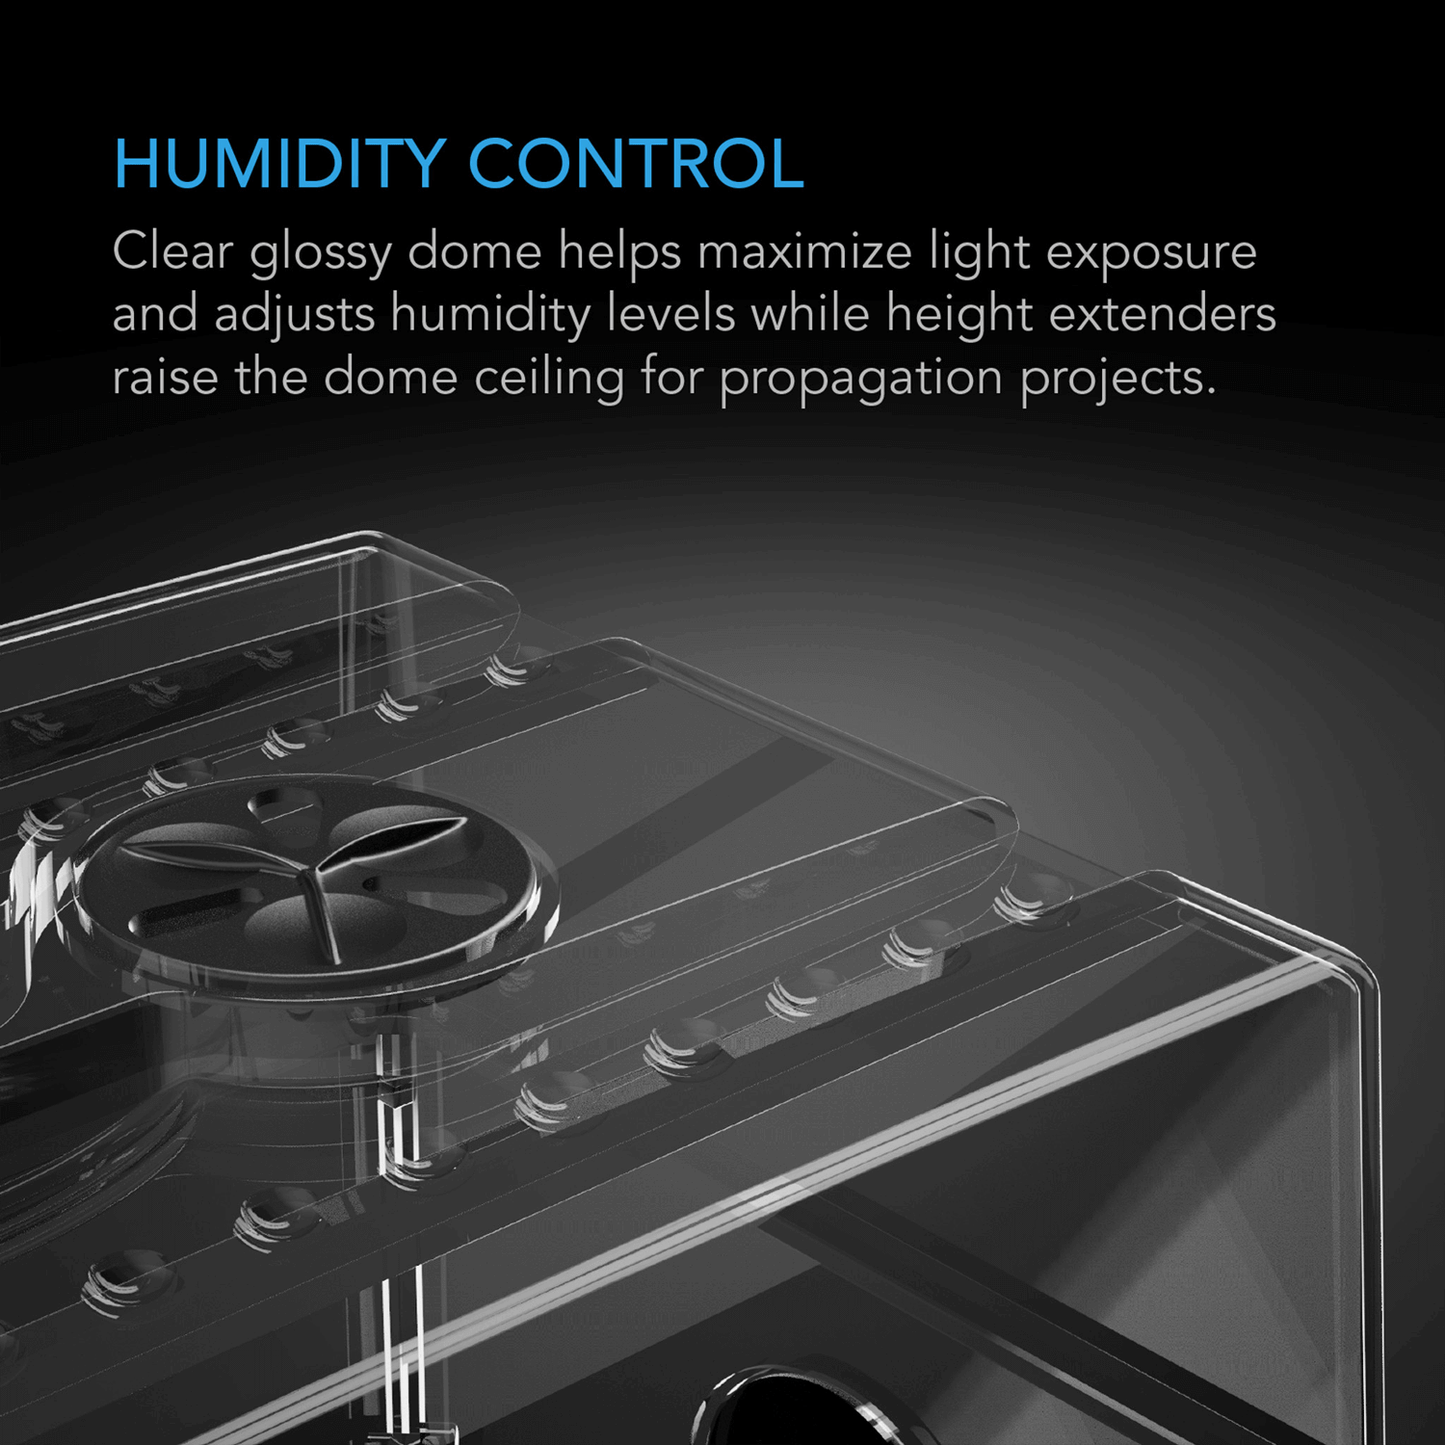 AC Infinity Humidity Dome, Large Propagation Kit, 6x12 Cell Tray | AC-HDA7 | Grow Tents Depot | Planting & Watering | 819137023864